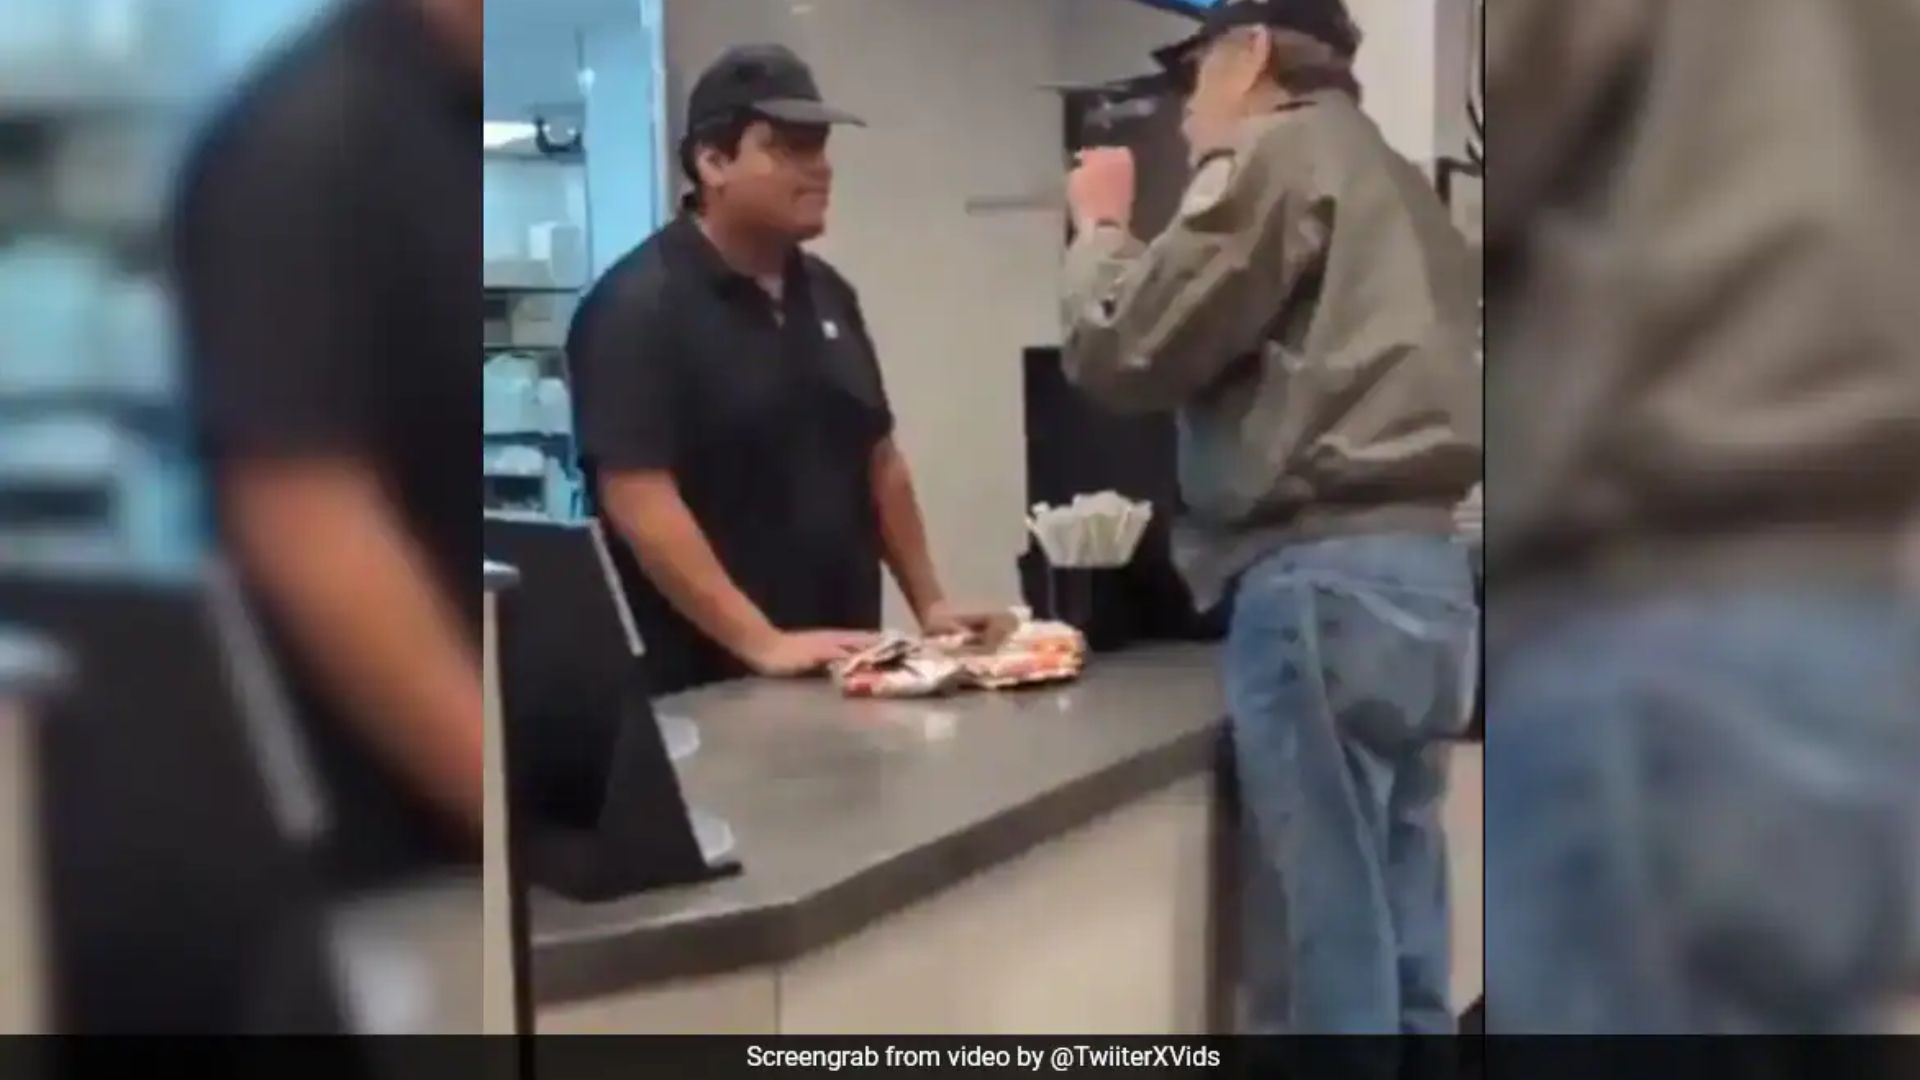 Watch: US Customer Slaps Taco Bell Employee Over Microwave Mishap, Video Goes Viral